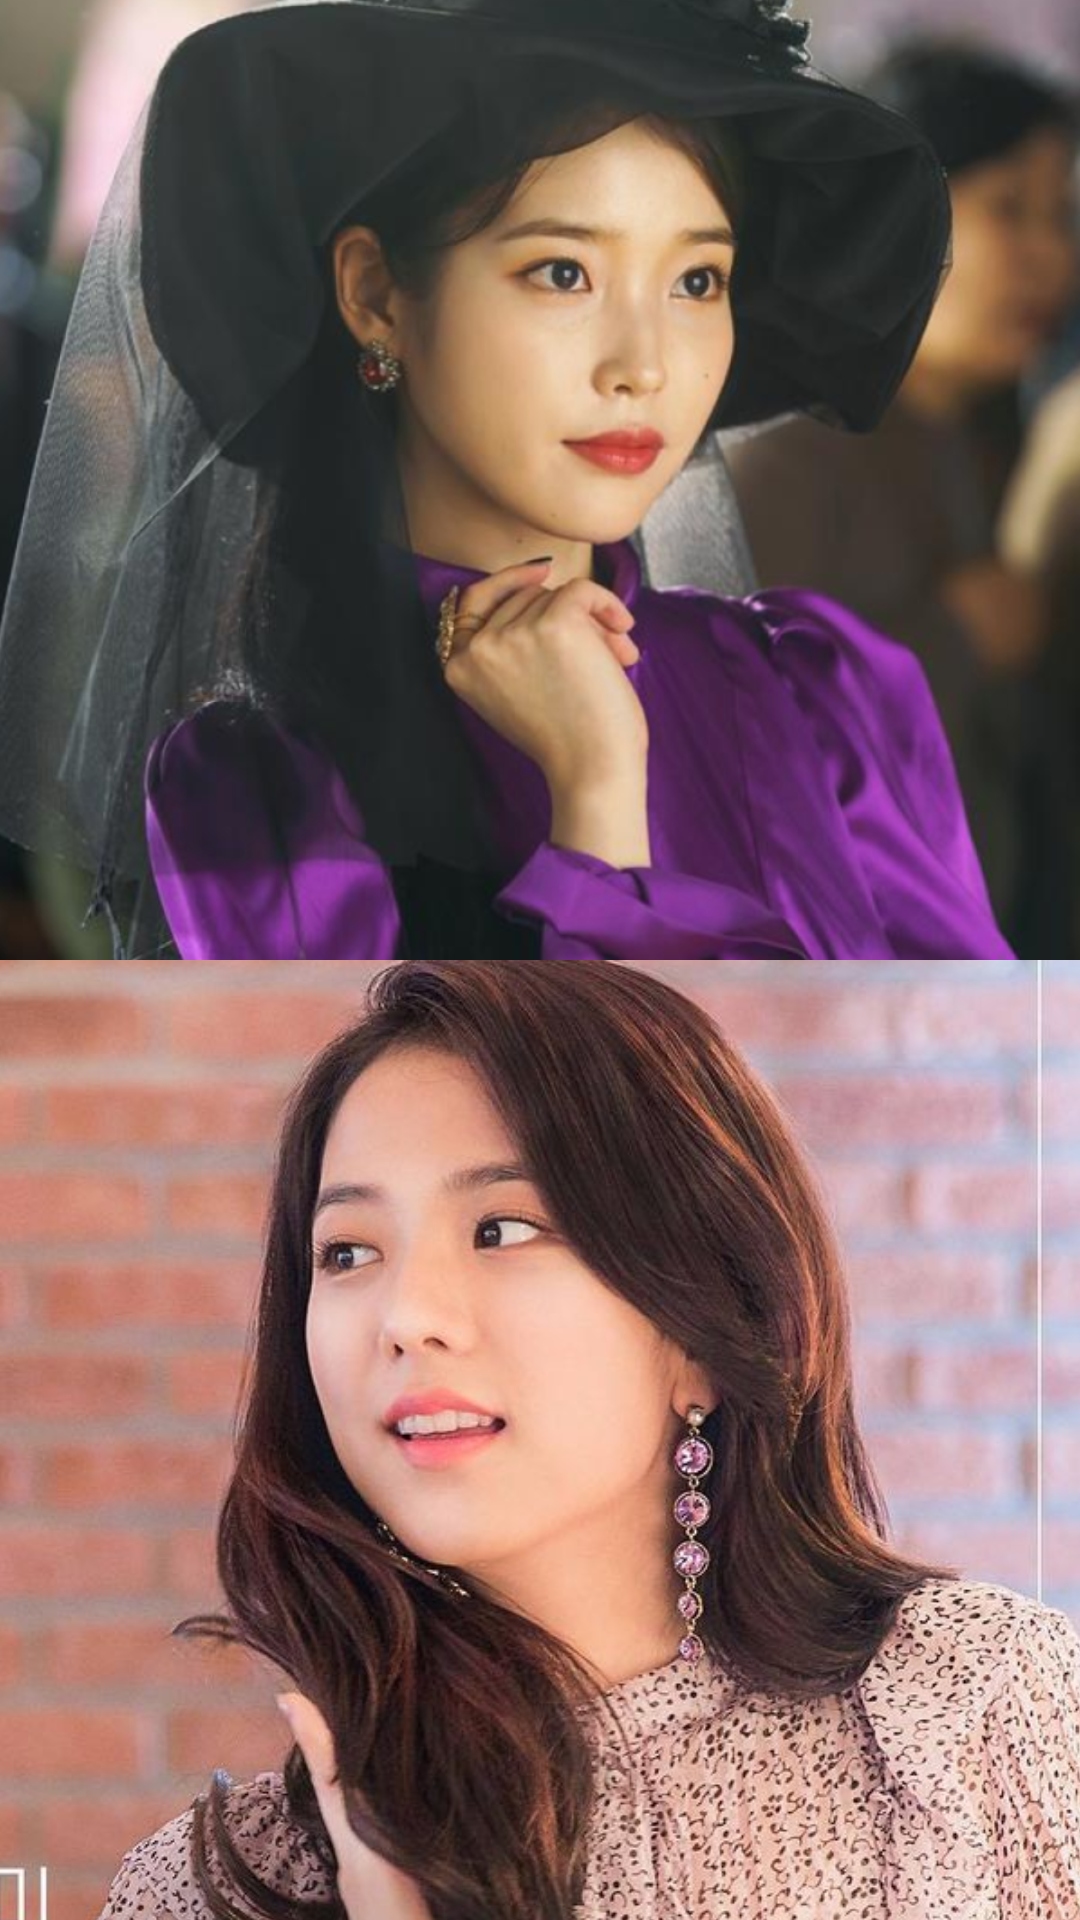 Hottest Kdrama Actors (Female) in 2023: IU, Jisoo, Bae Suzy and others